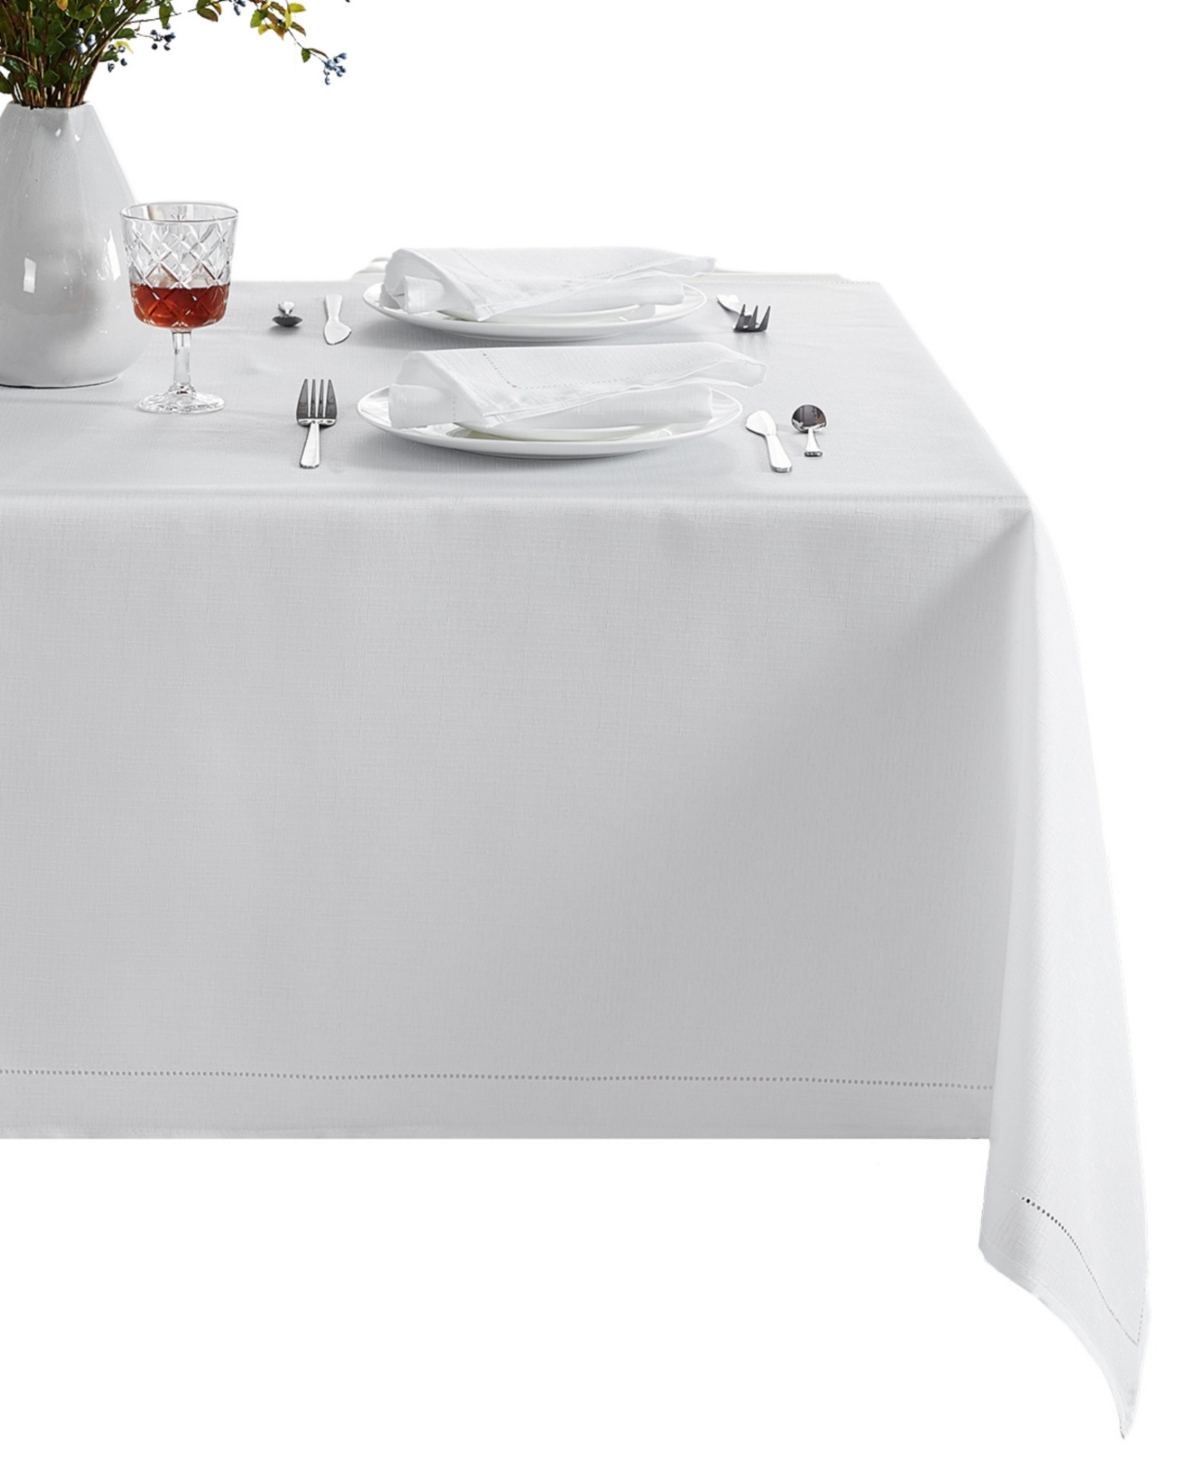 Elrene Alison Eyelet Punched Border Fabric Tablecloth 52" X 52" In White